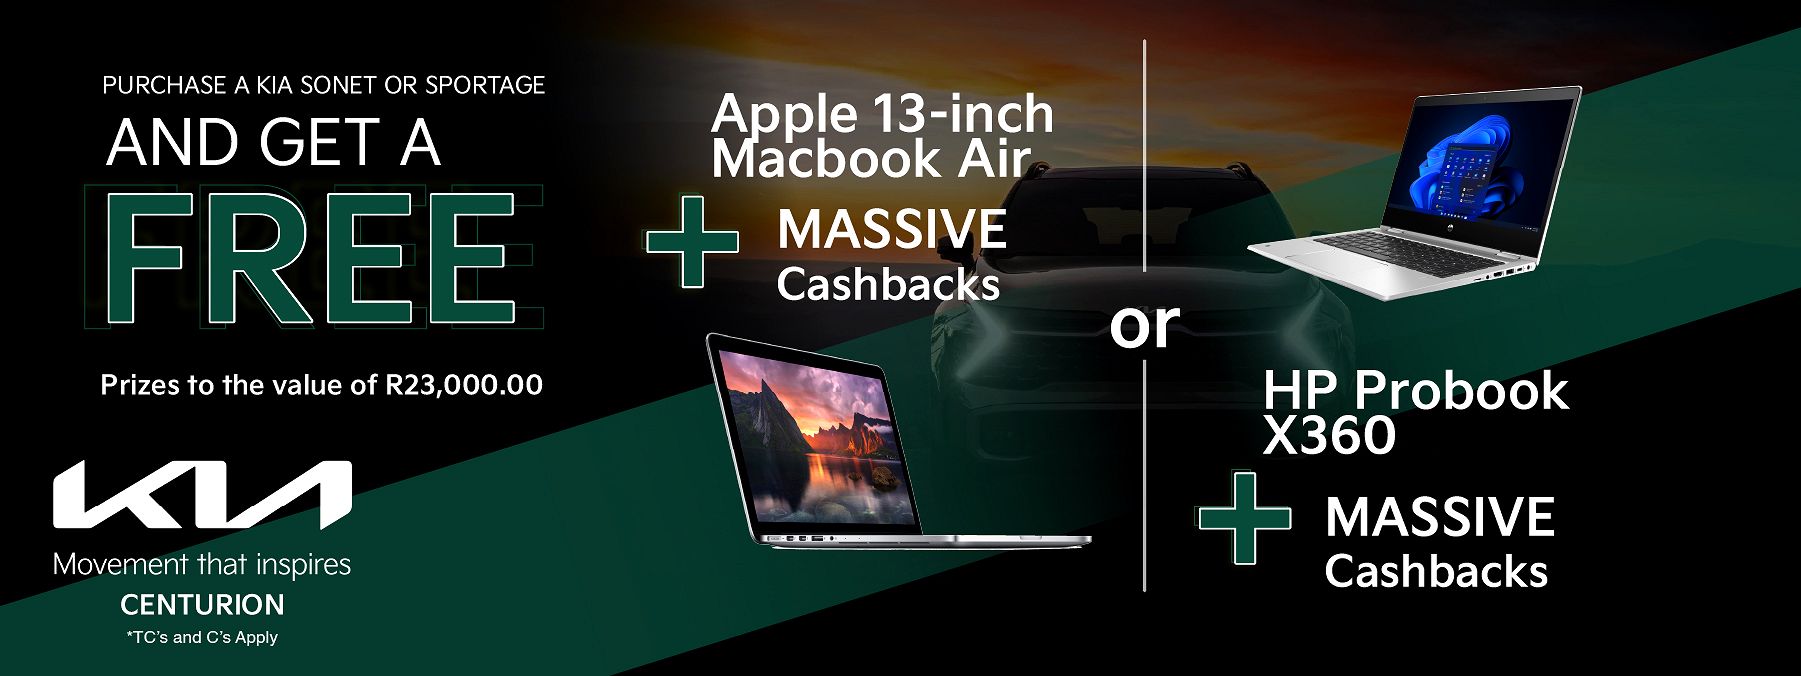 Free Laptop to the value of R23,000.00 + R20,000.00 cashback